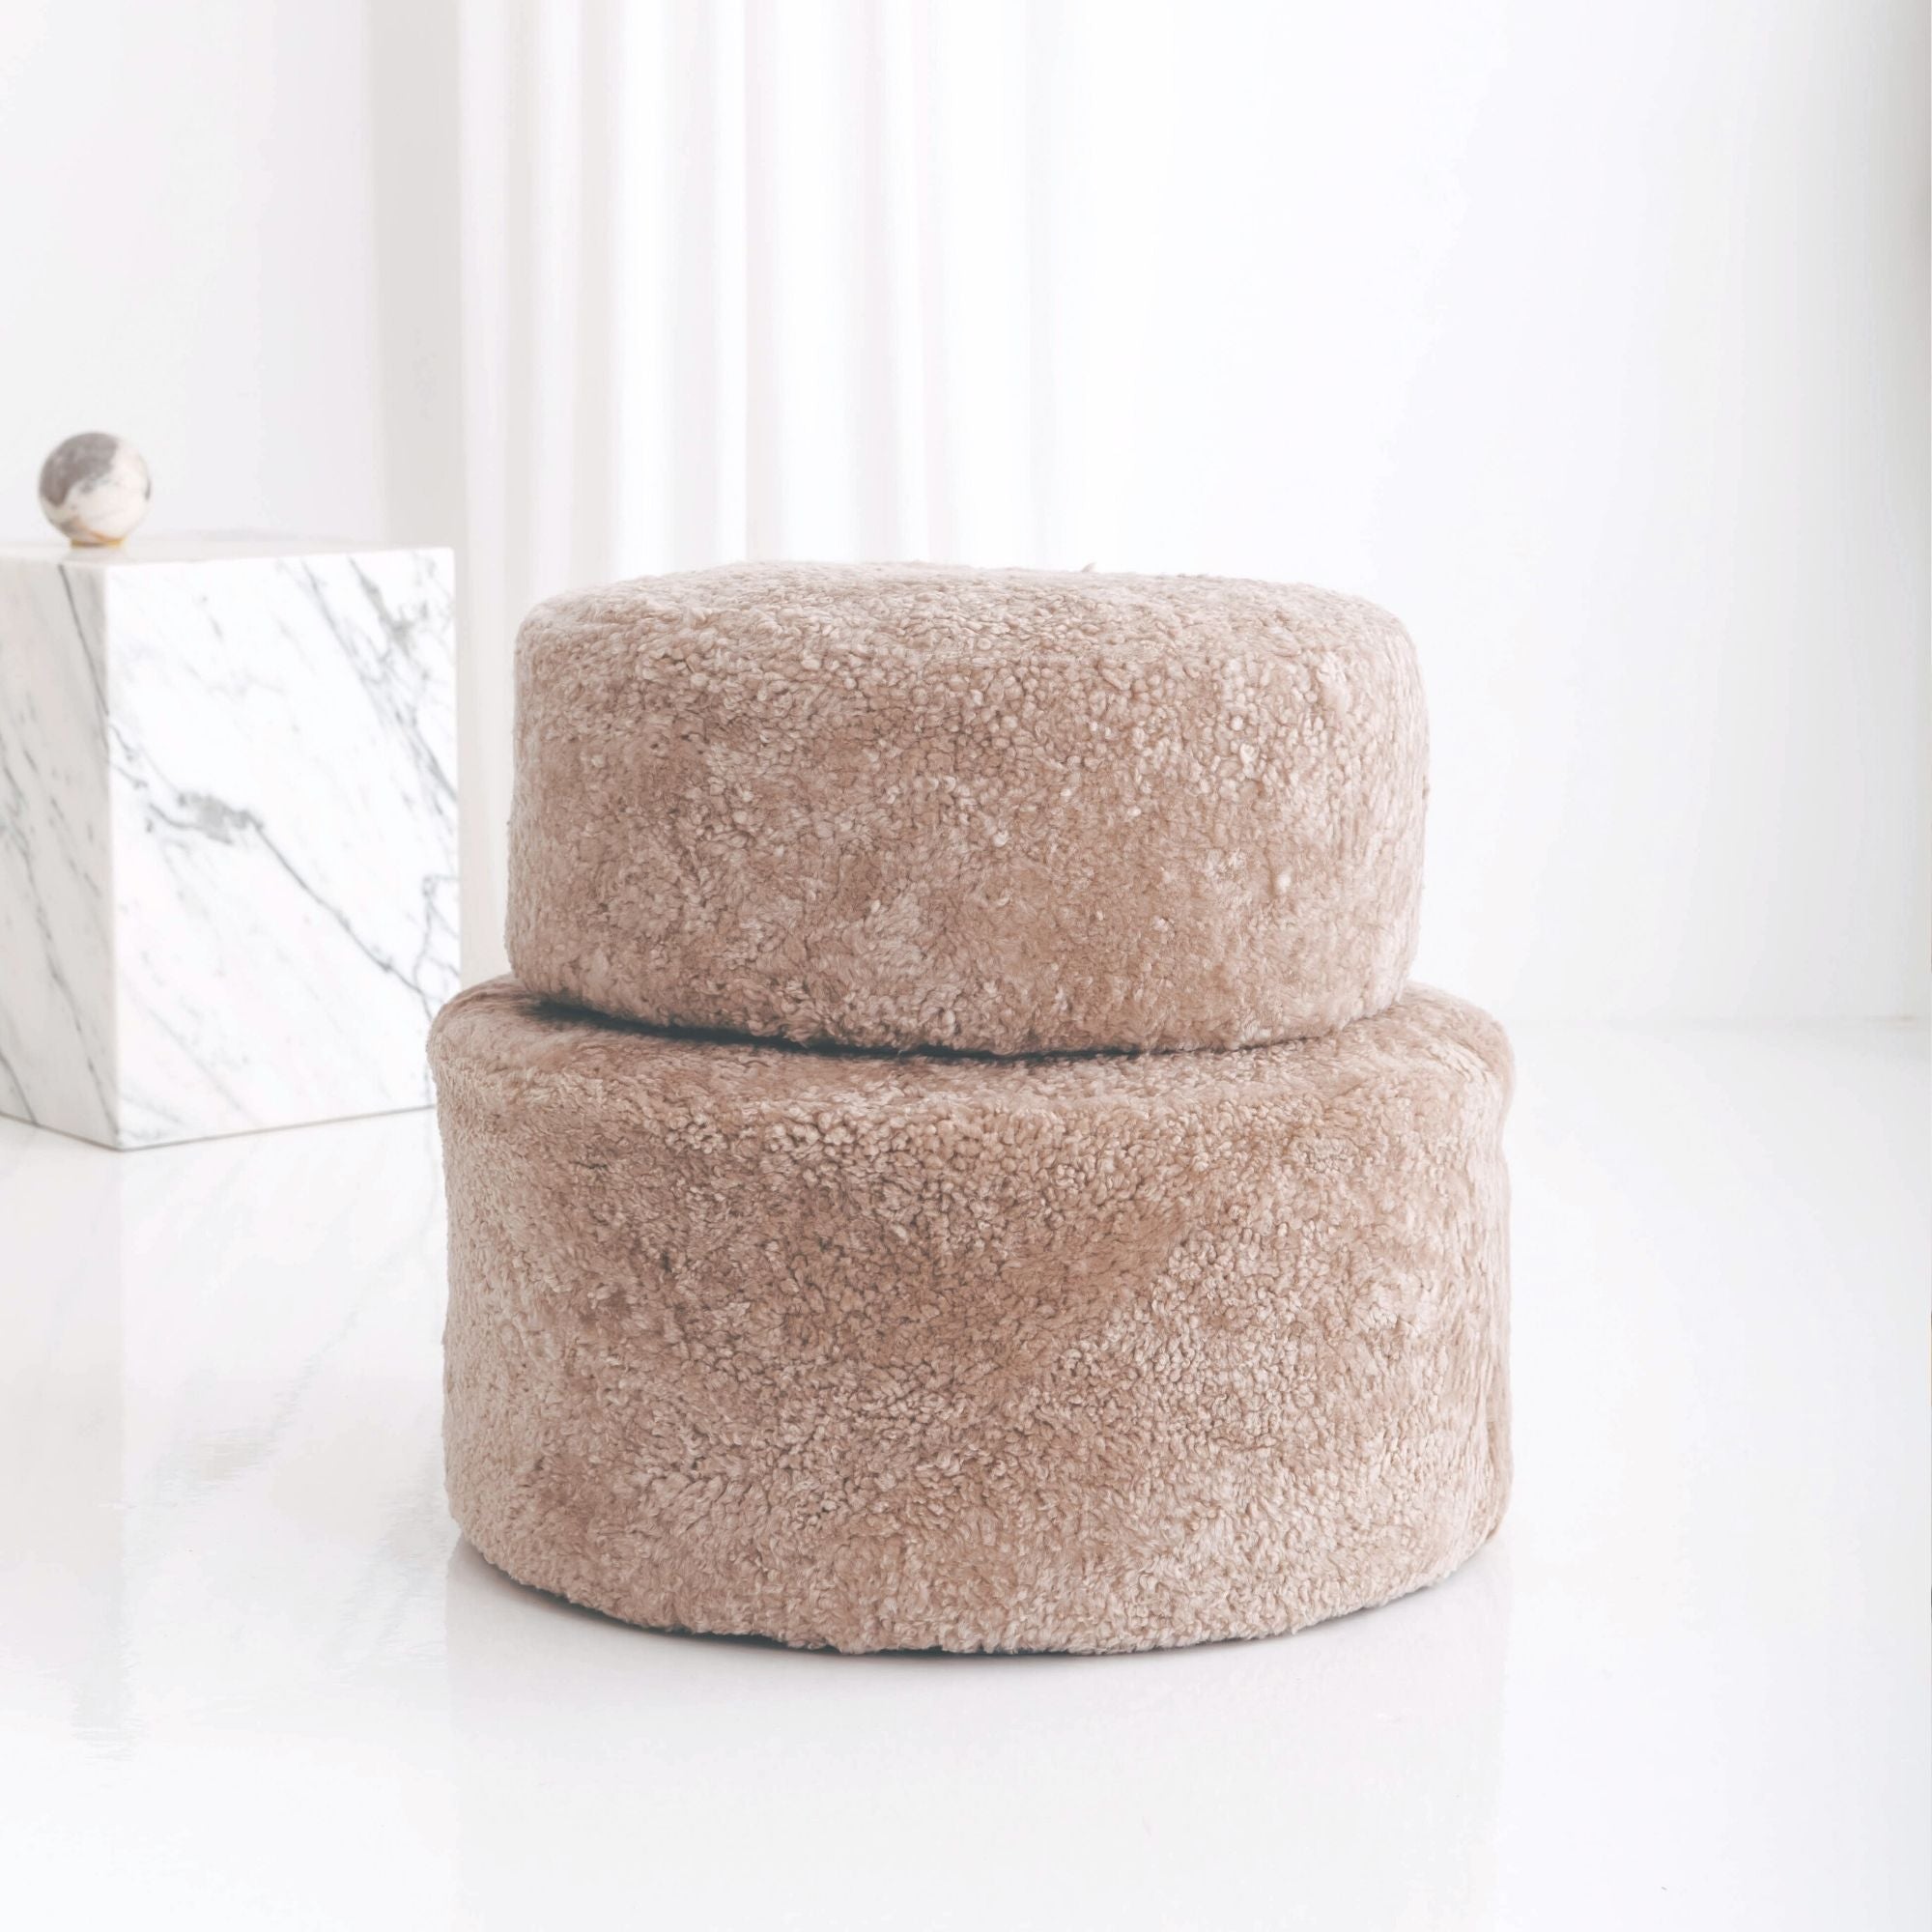 Bring natural texture and contemporary design into your space with the sturdy and stylish handmade Jamieson Round Ottoman. Choose between two sizes and three beautiful modern colours, or mix-and-match